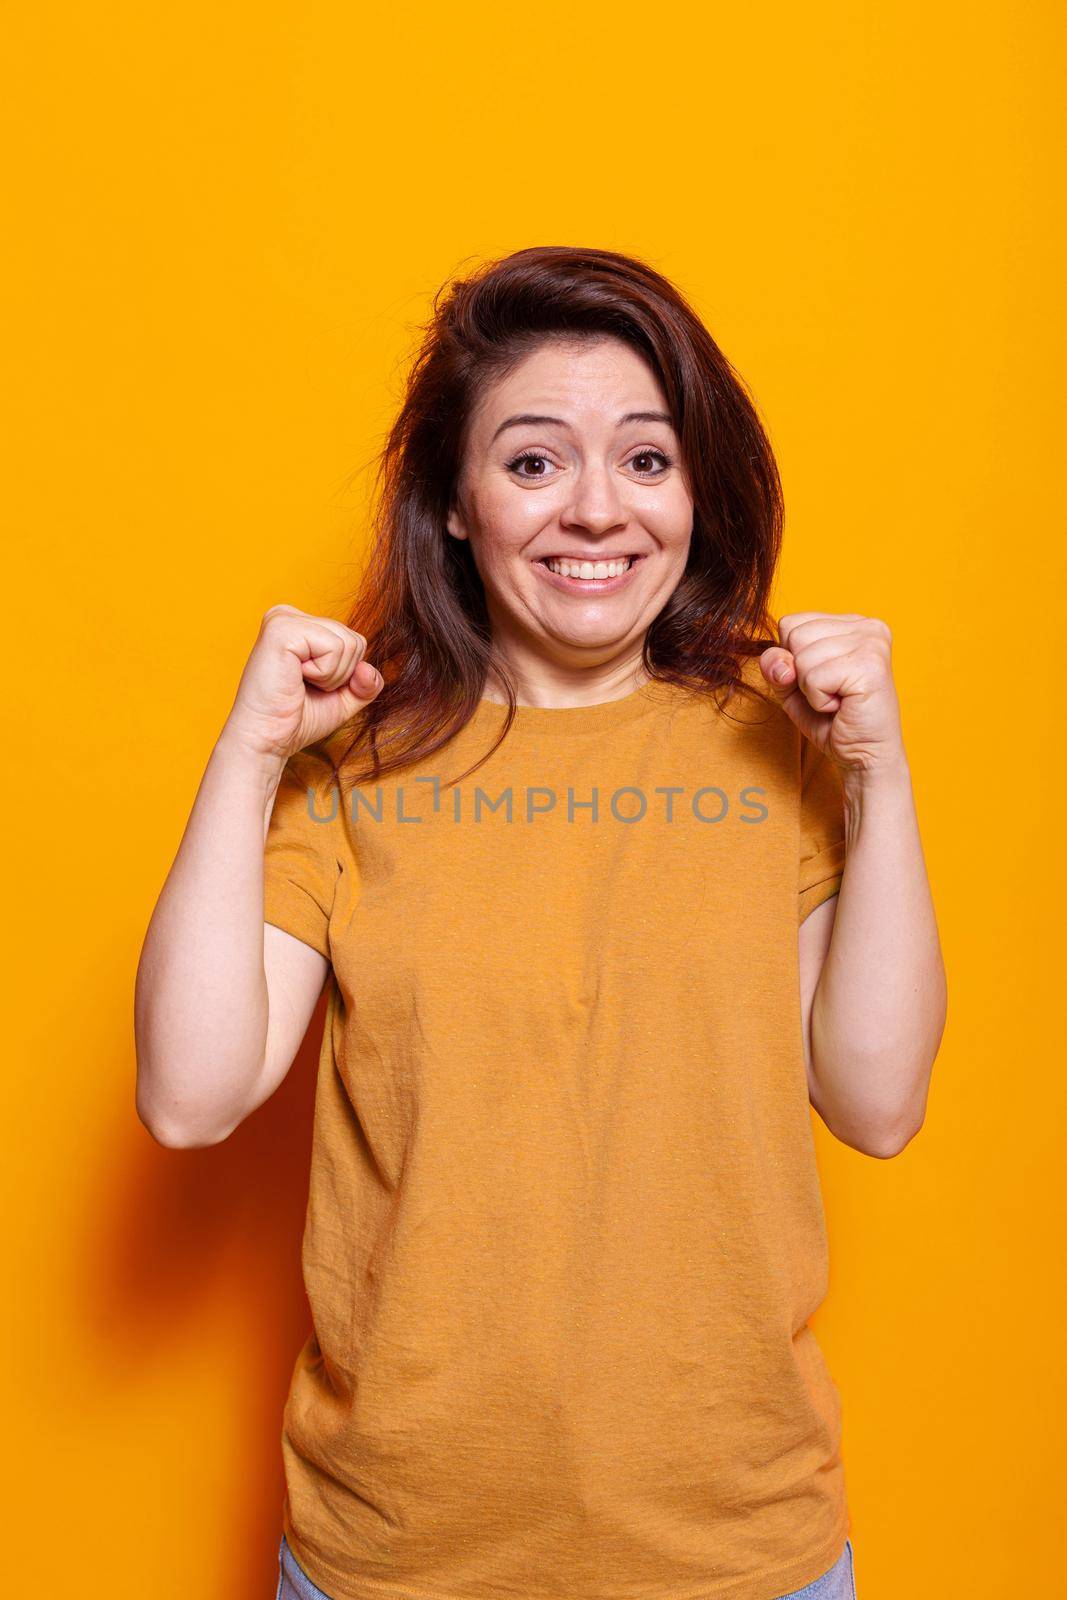 Joyful woman clenching fists and smiling in studio by DCStudio